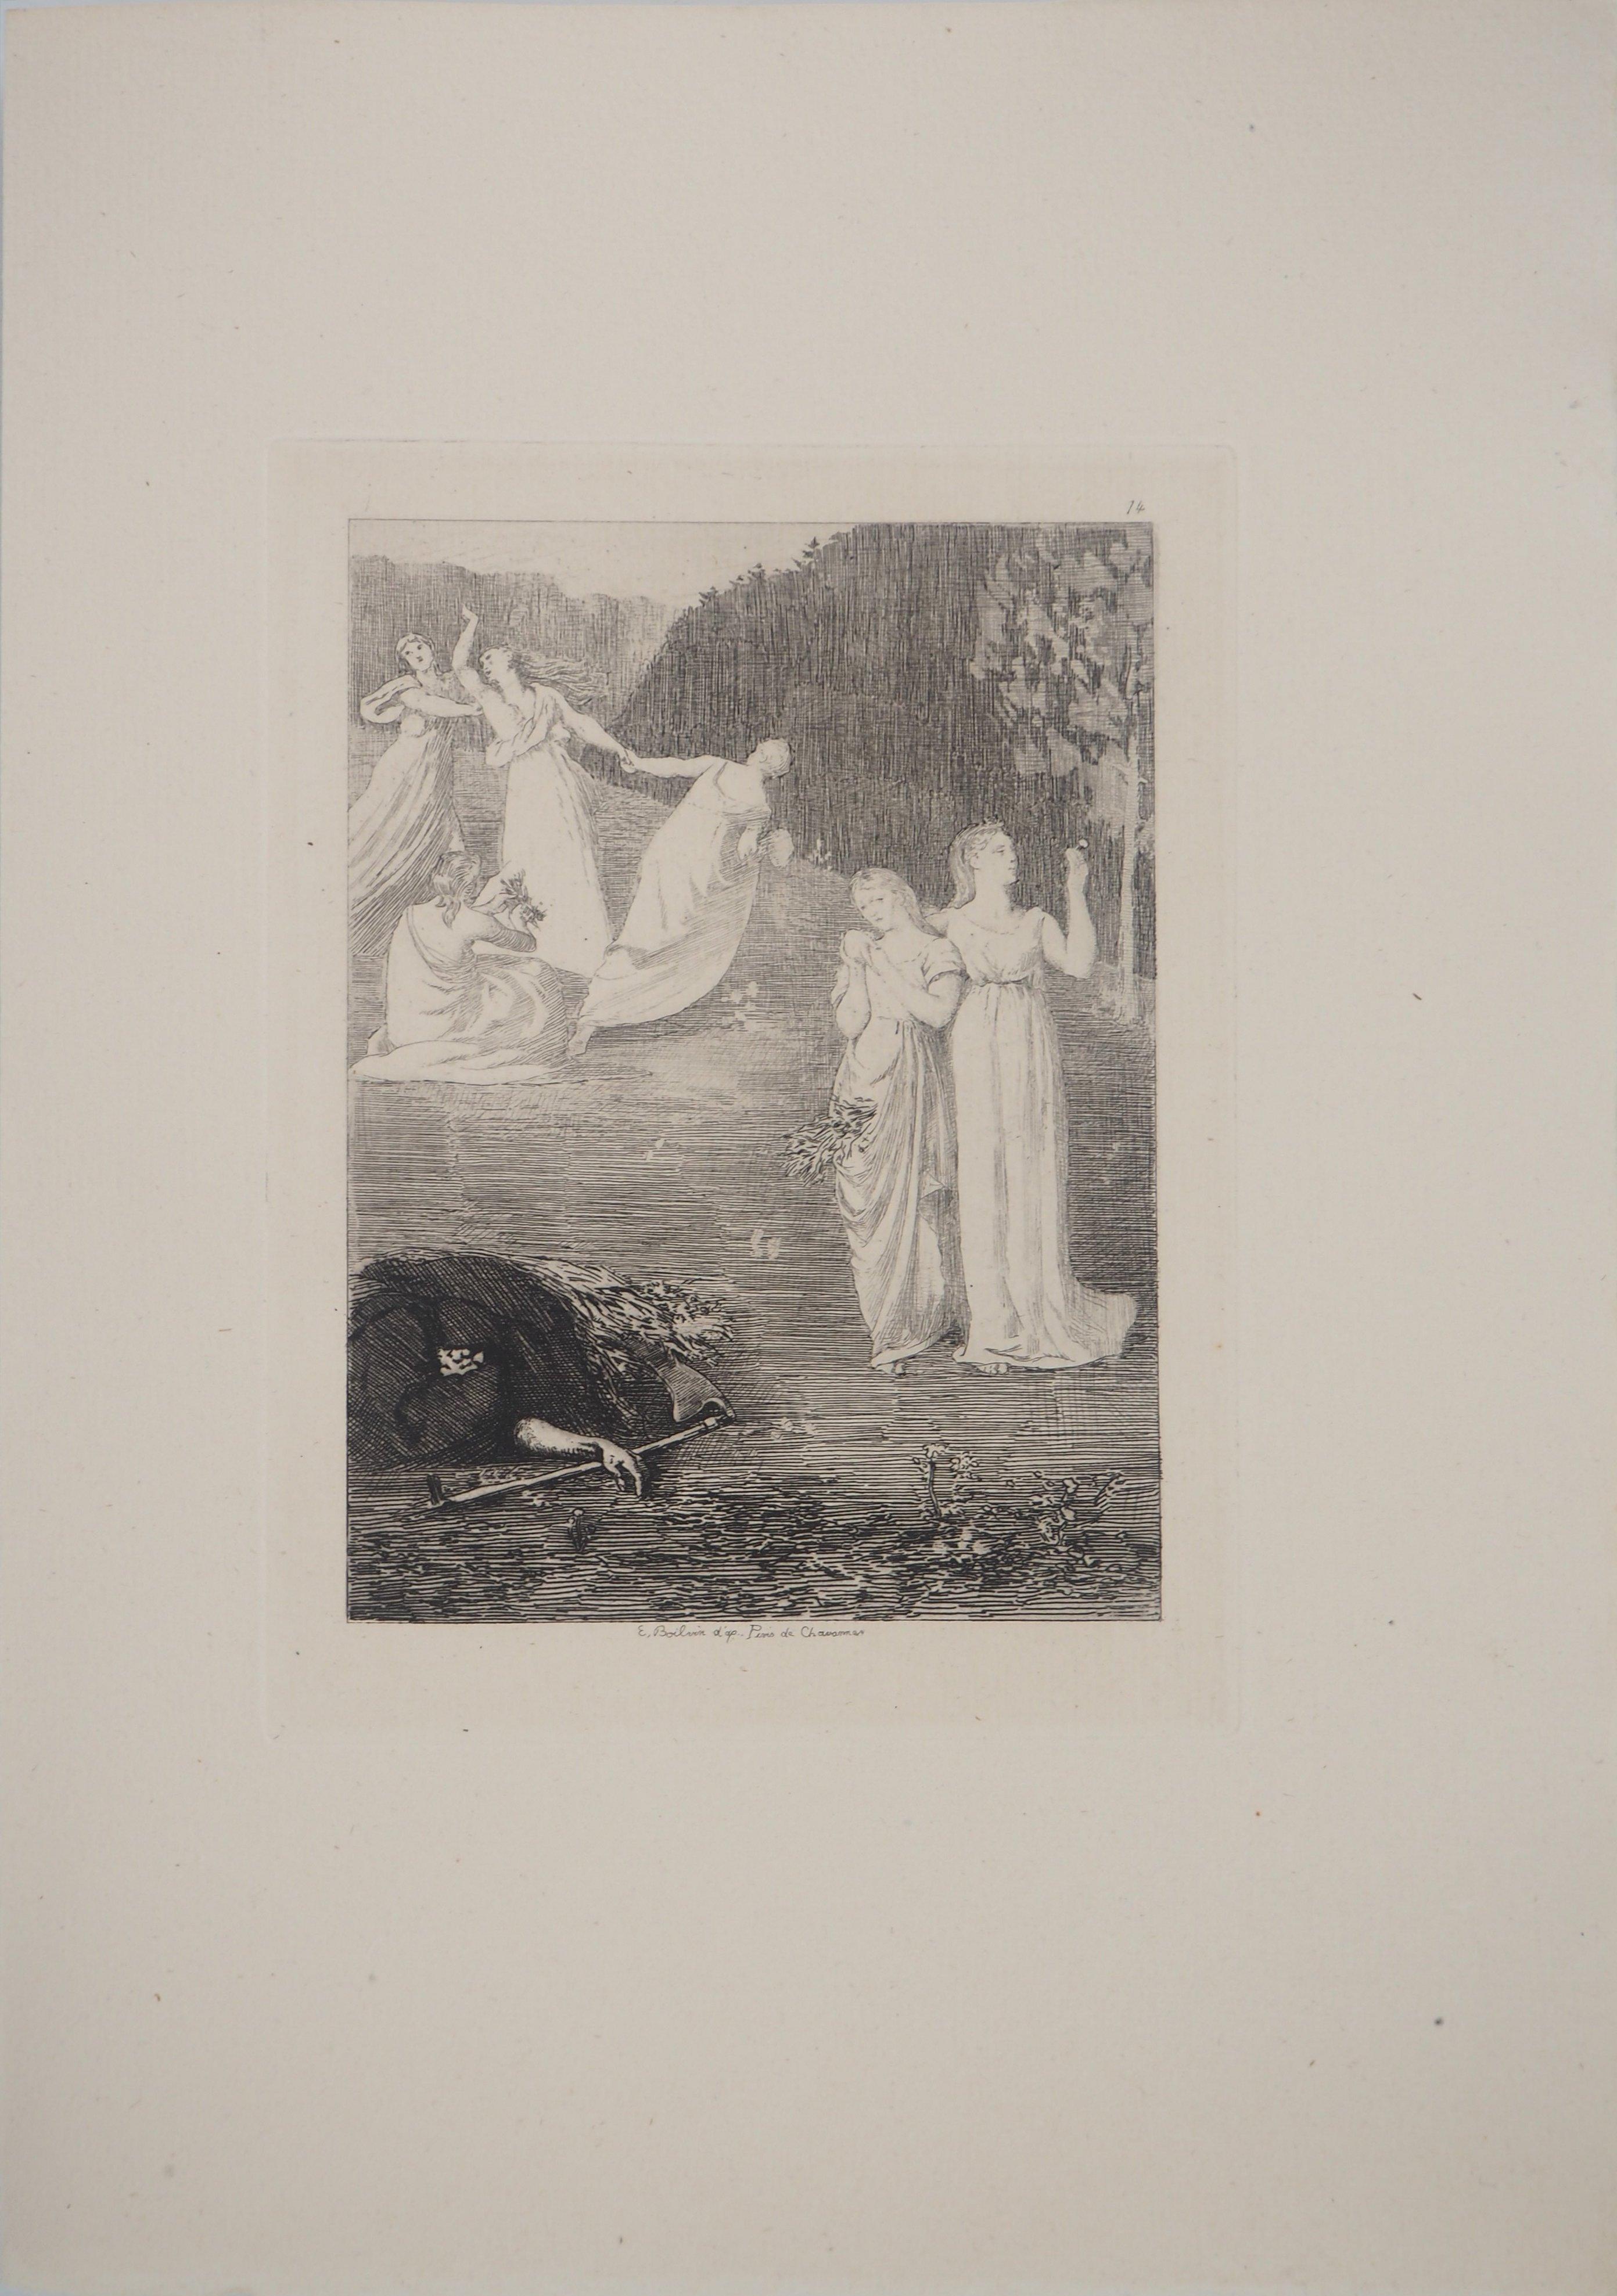 The Reaper : Life and Death - Original etching - Ed. Durand Ruel, 1873 - Impressionist Print by Pierre Puvis de Chavannes